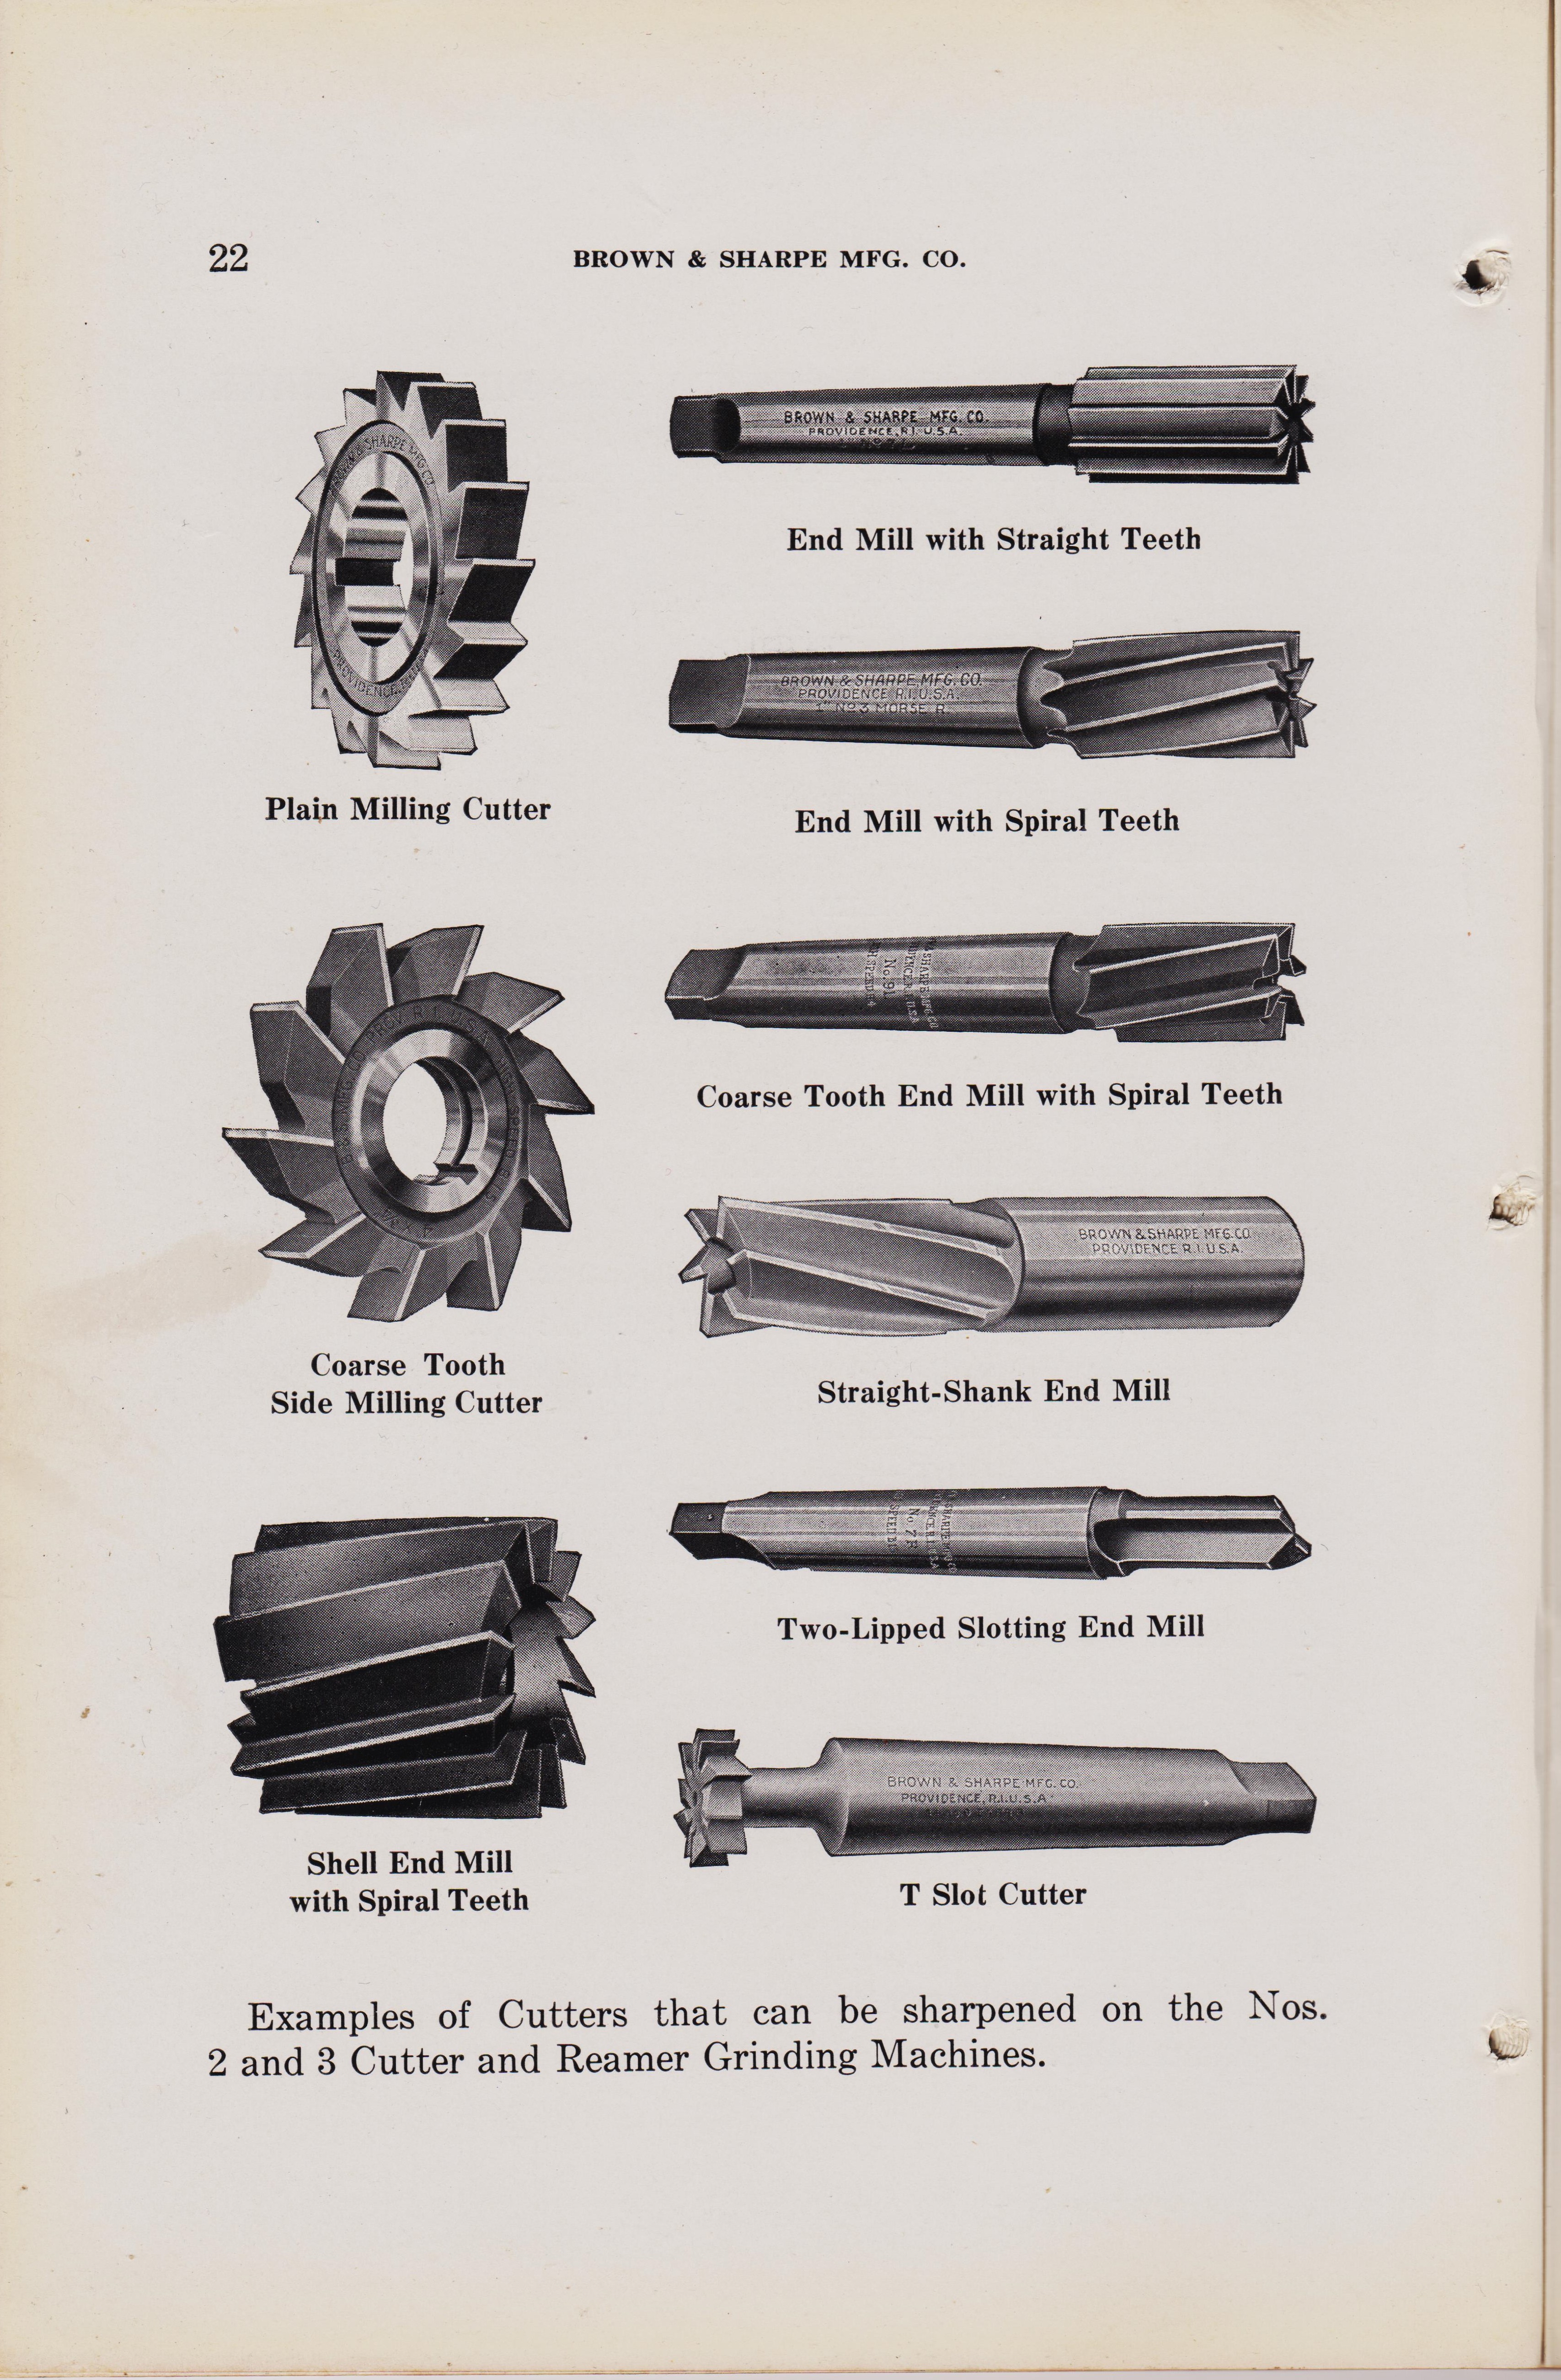 https://antiquemachinery.com/images-2020/Universal-Cutter-and-Reamer-Grinder-Machine-Brown-and-Sharpe-Mfg-Co-1929-No2-pg-22-Cutters-that-can-be-Sharpened.jpeg